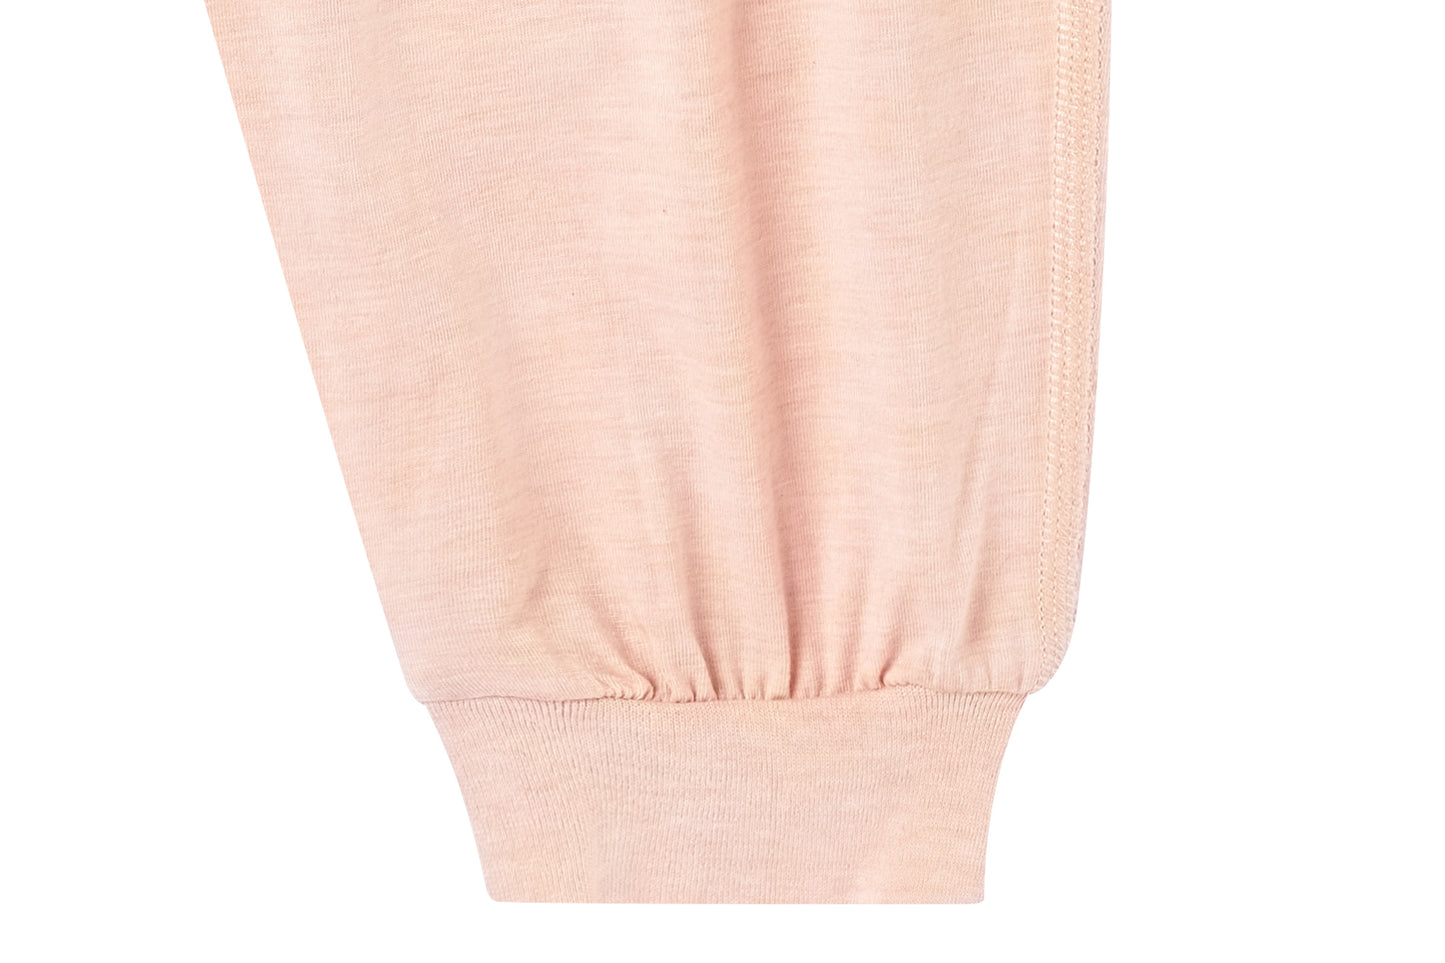 Load image into Gallery viewer, Harem Pants (Bamboo Jersey) - Pantone Bellini
